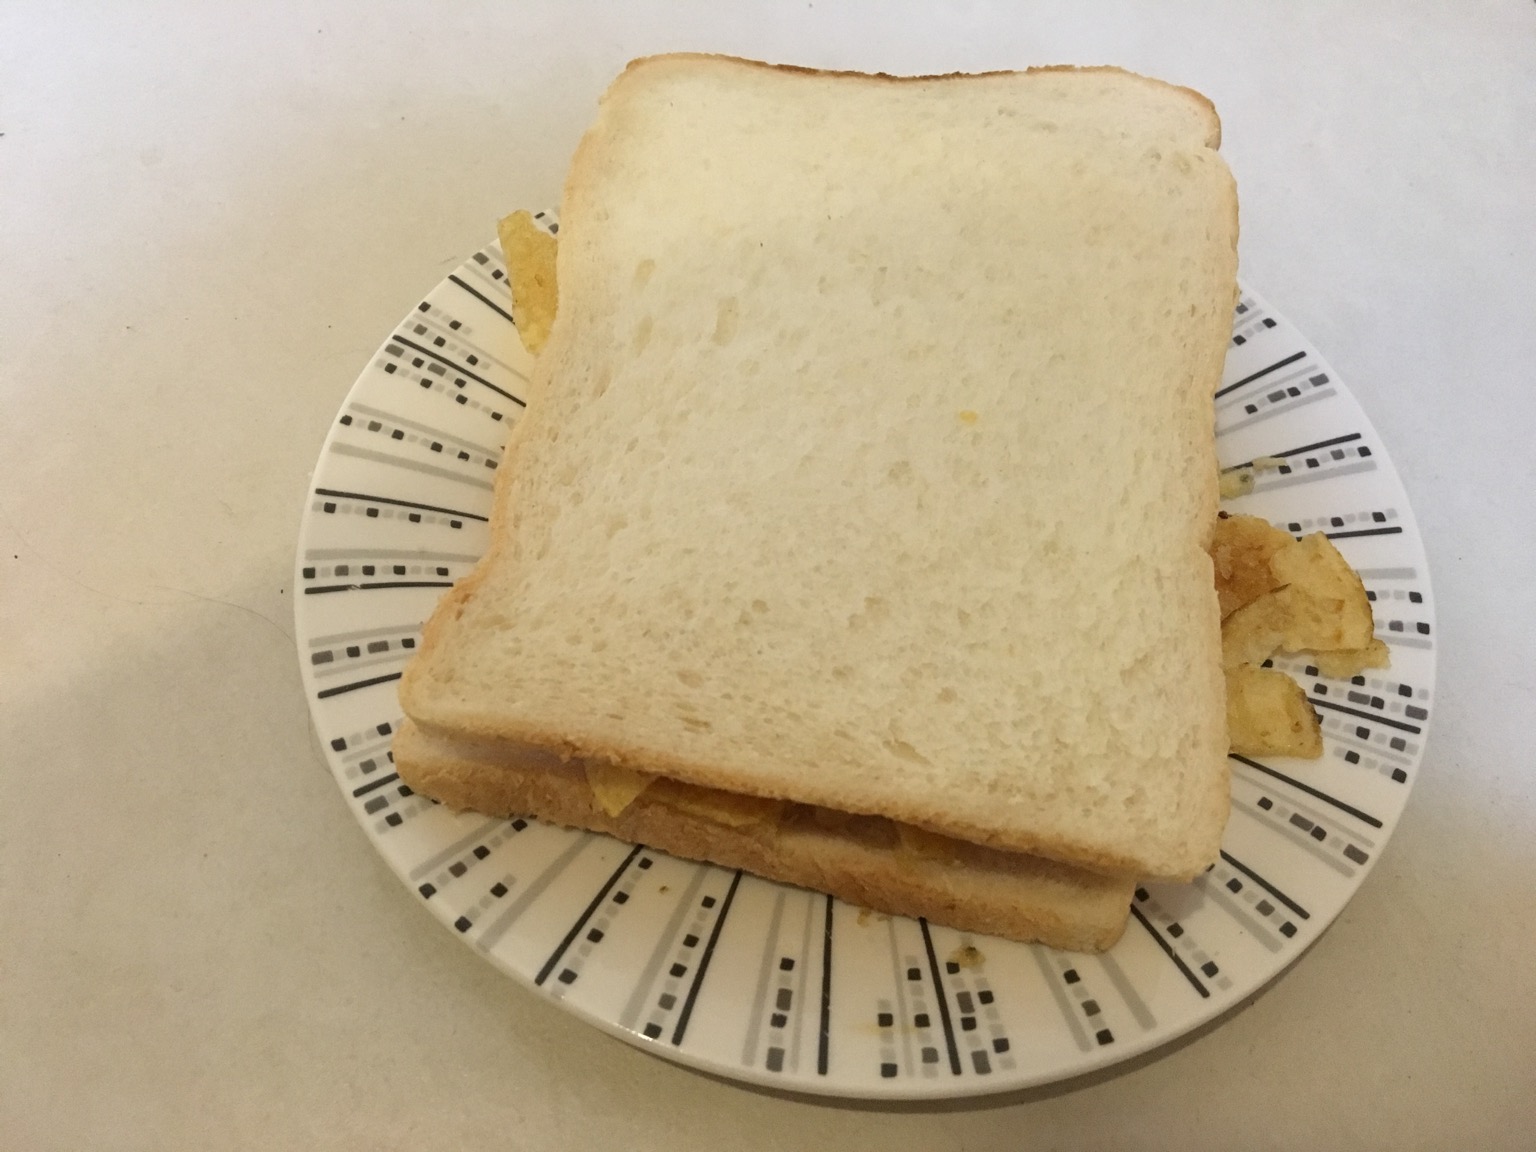 Crisps within two slices of white bread